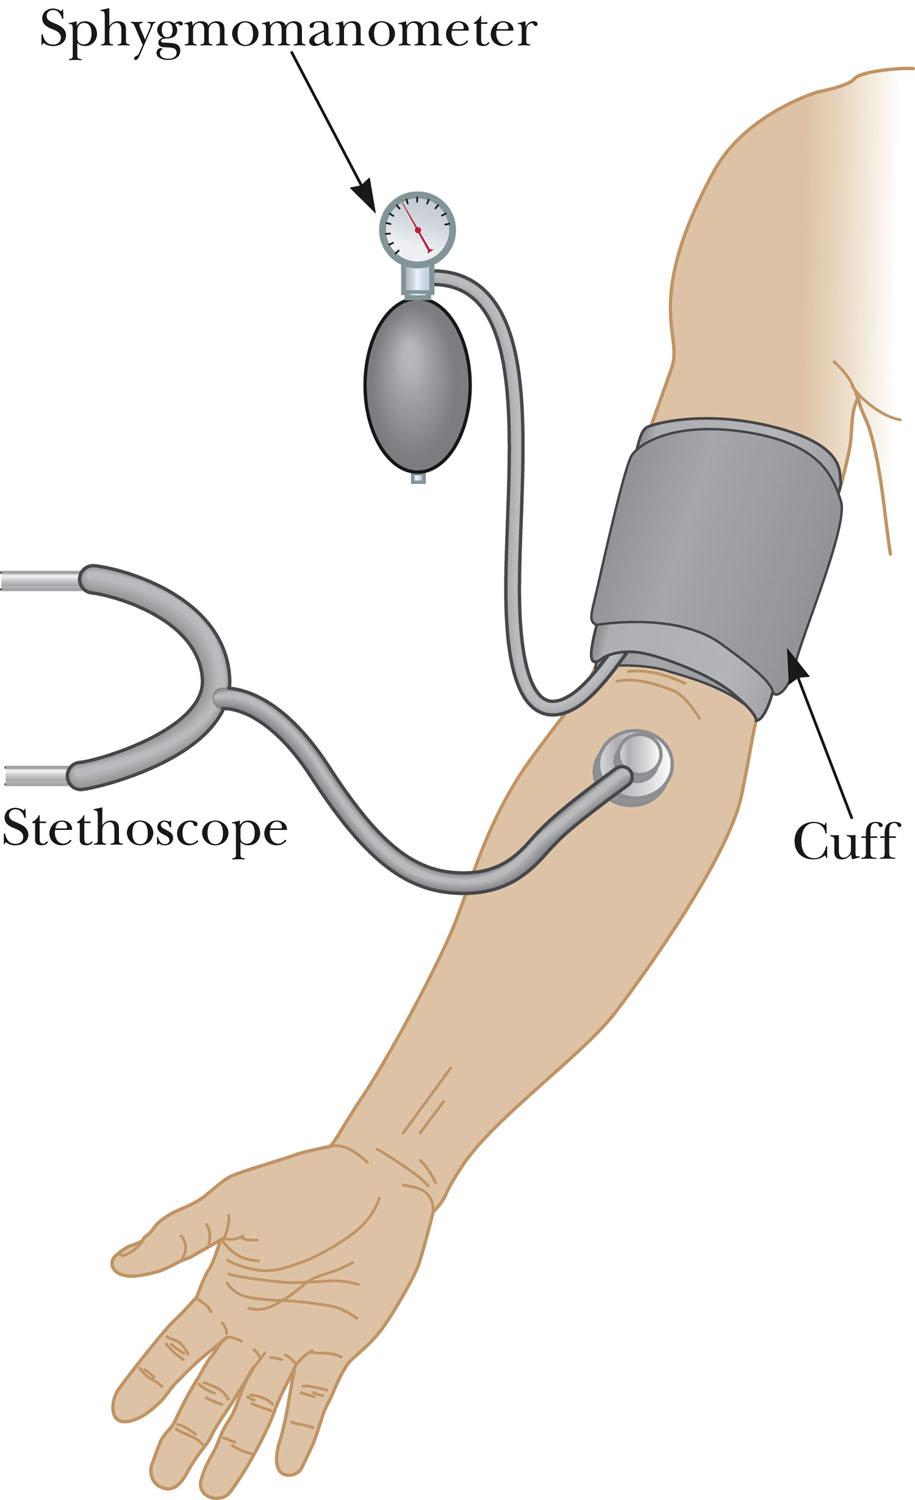 Blood pressure measurements The pressure in the cuff is increased until the flow of blood through the brachial artery is stopped. The pressure is measured simultaneously by a manometer.